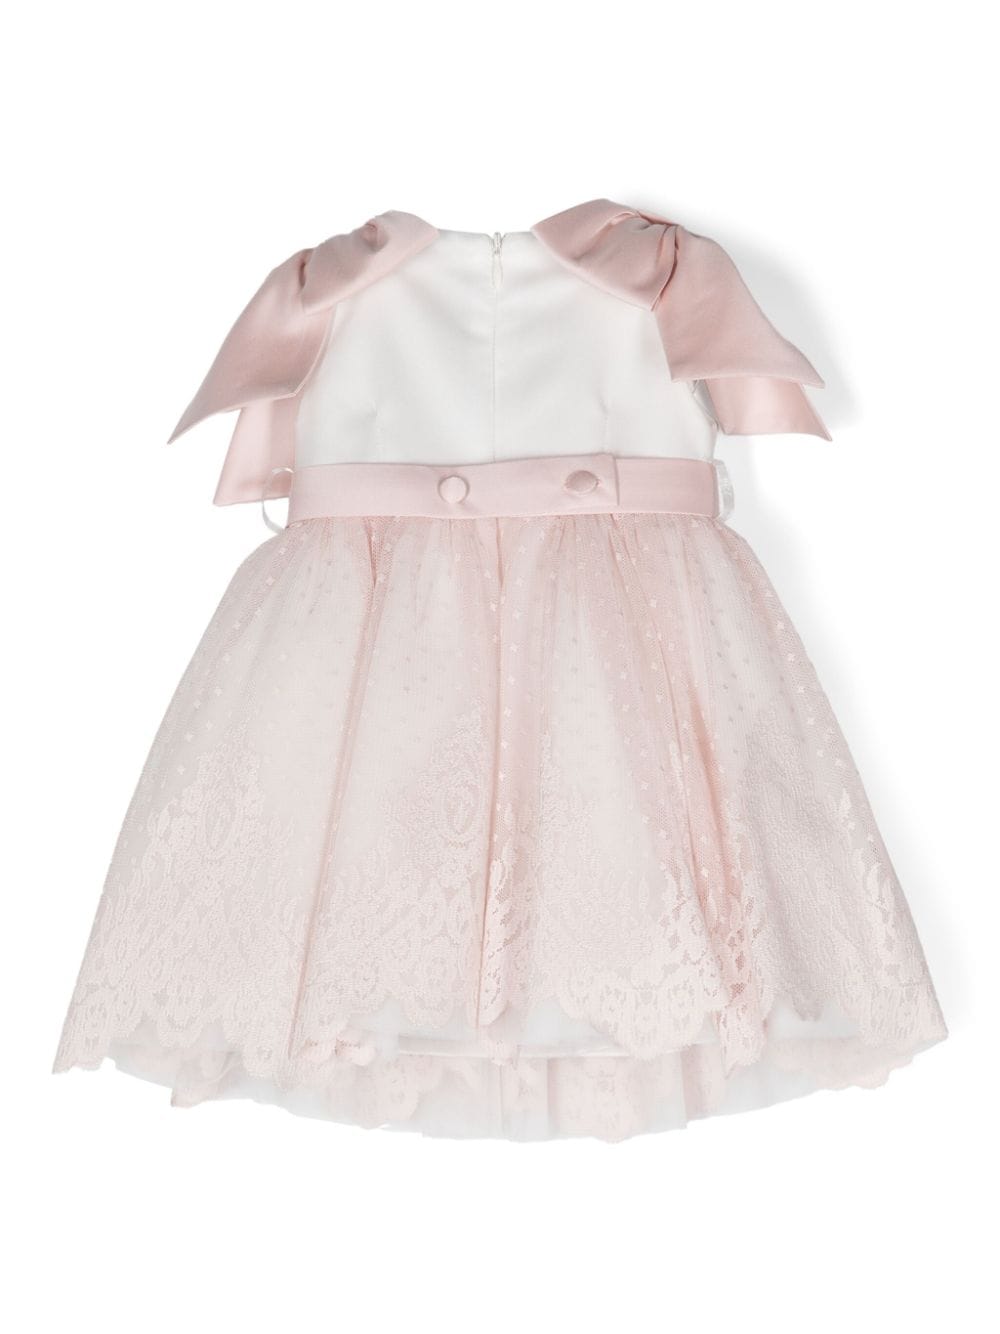 Pink dress for baby girl